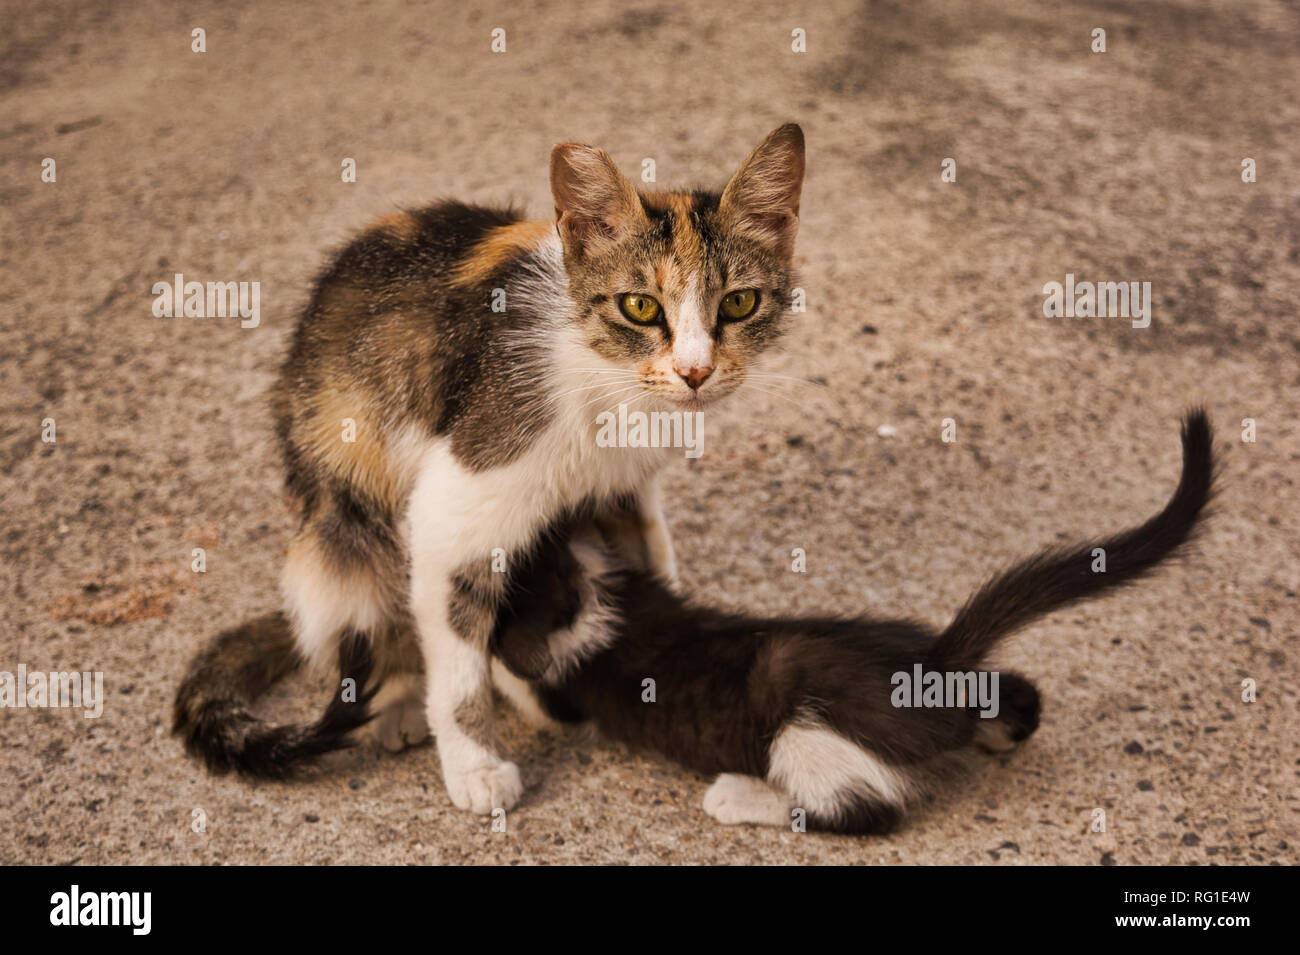 Cat mom feeding her baby kitten. Stray cat image of a tabby cat and her cute little kitty girl Stock Photo